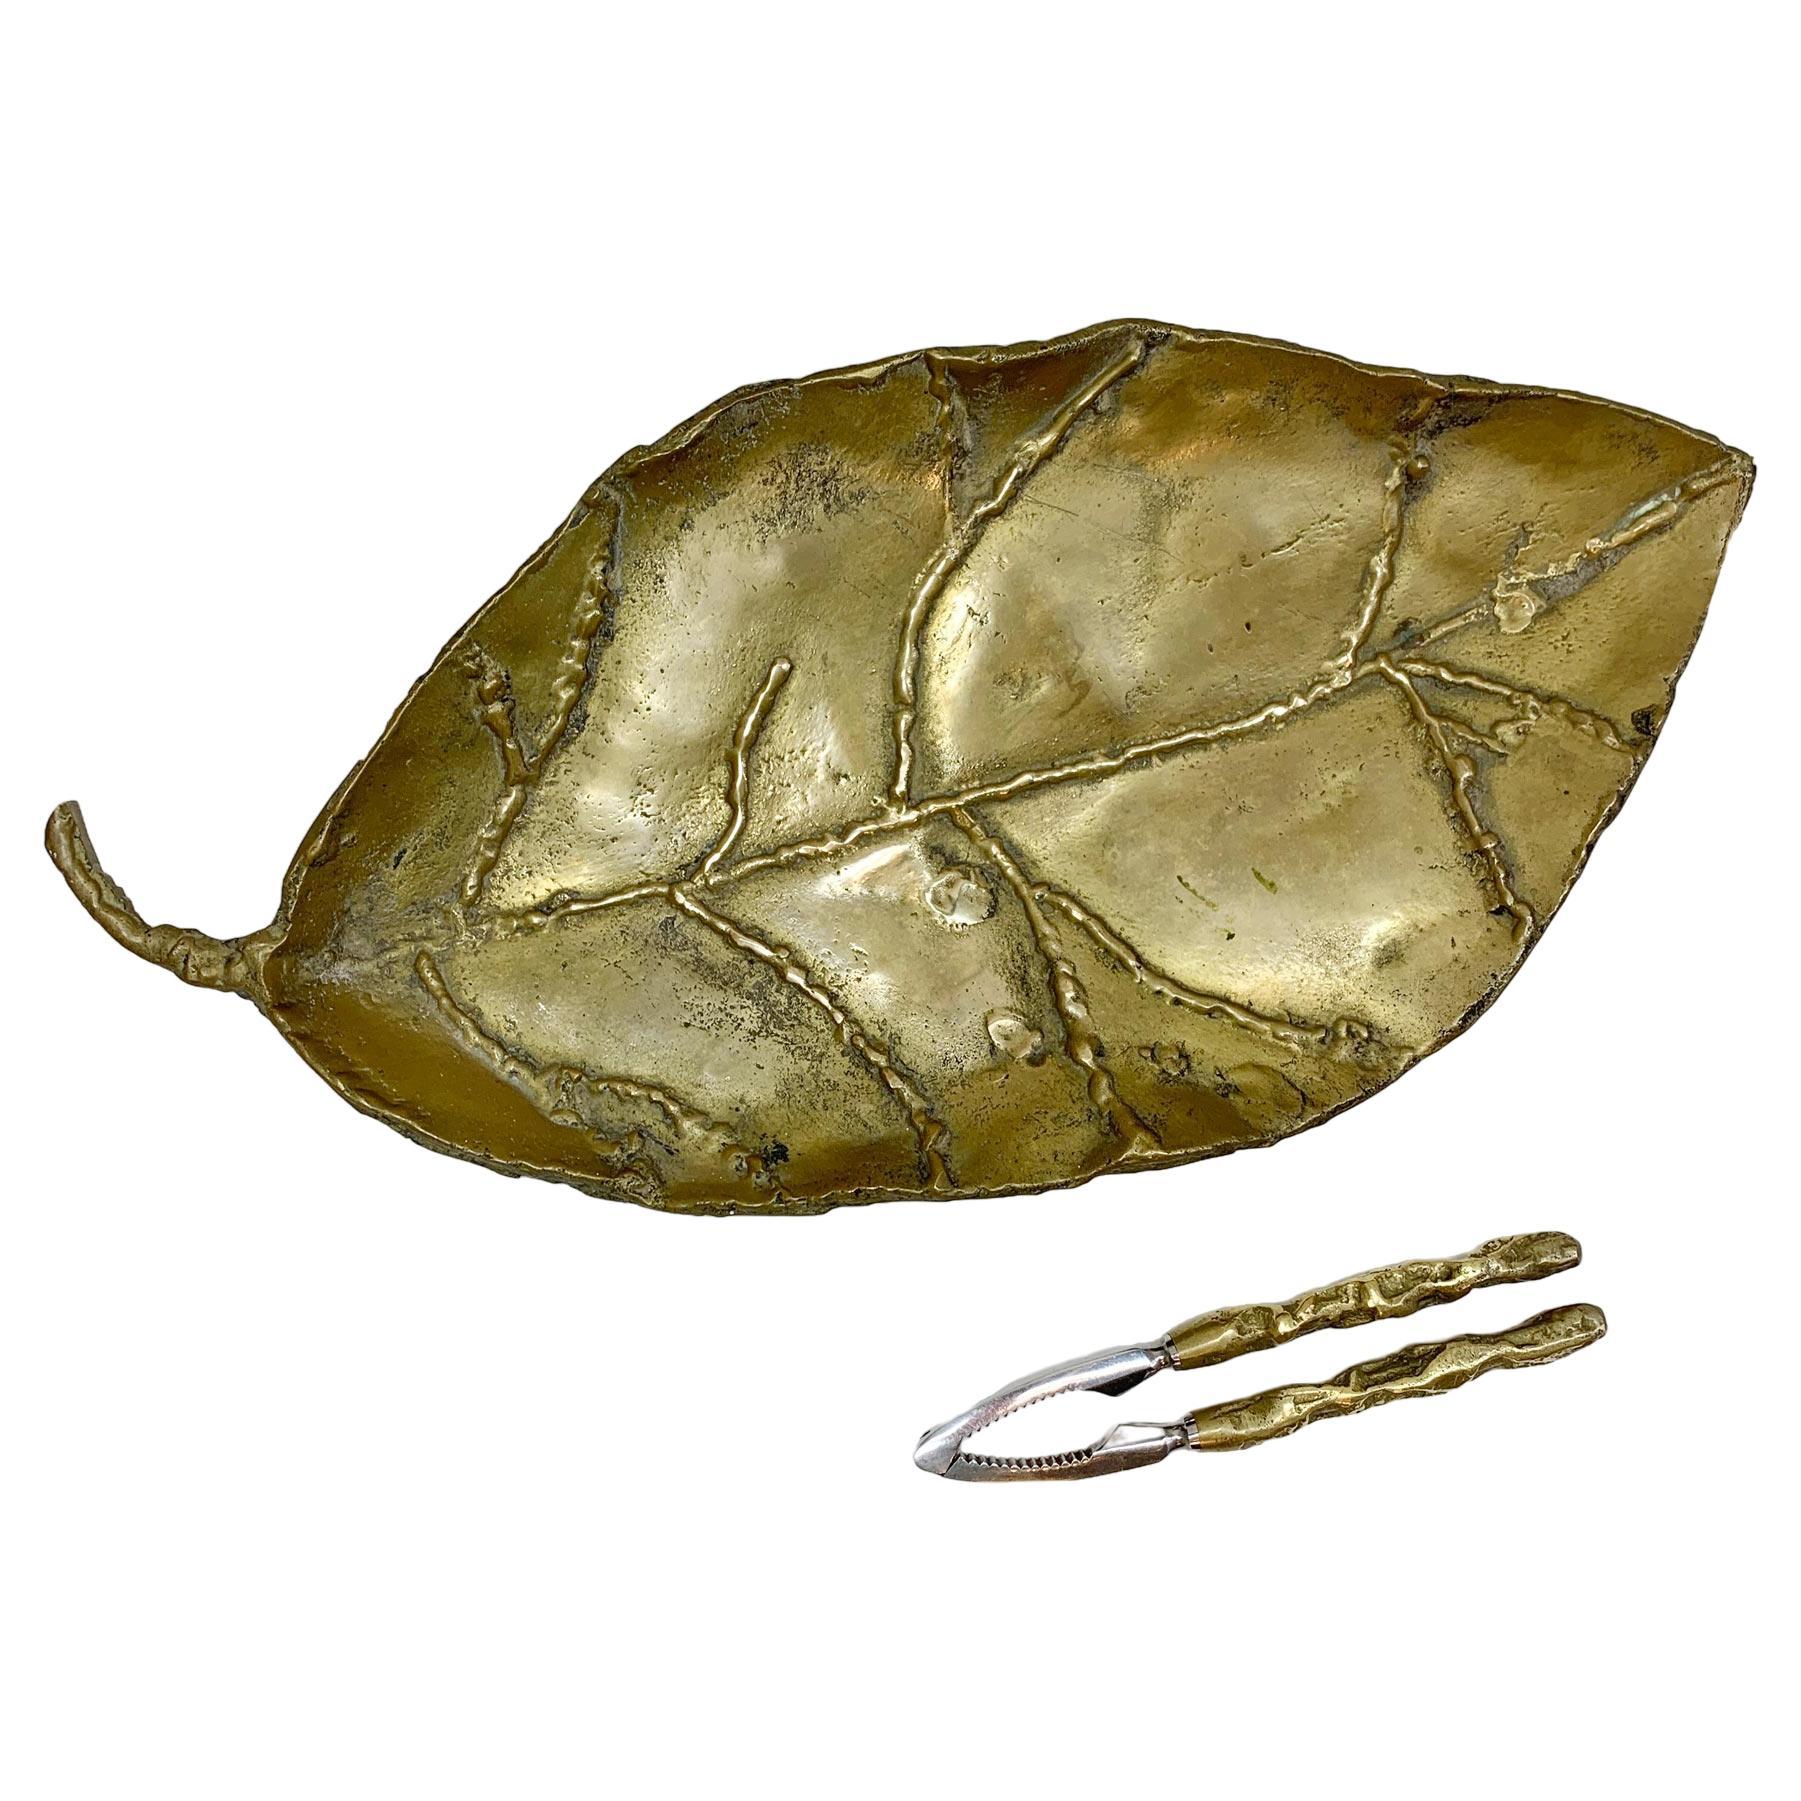 Decorative Brass Leaf Sculpture and Nut Cracker By David Marshall 1970’s